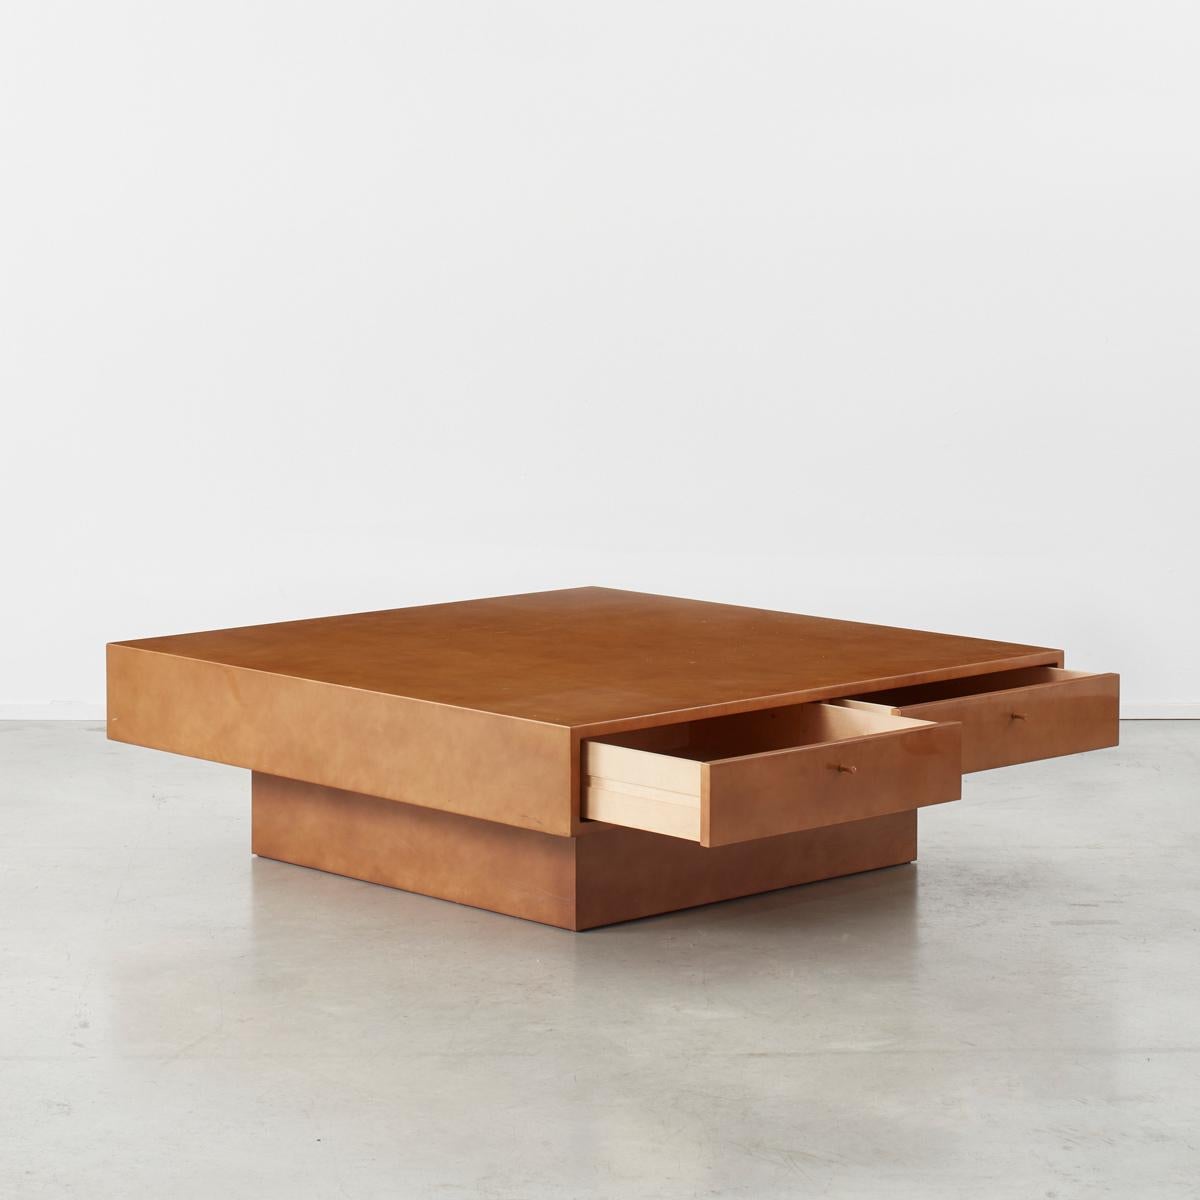 This is a one off piece designed by Theo Schulmann for his home, acquired from his personal collection. It sits on a recessed base giving it a light touch. The table is simple in form with a thick relaqué top concealing four draws, each with